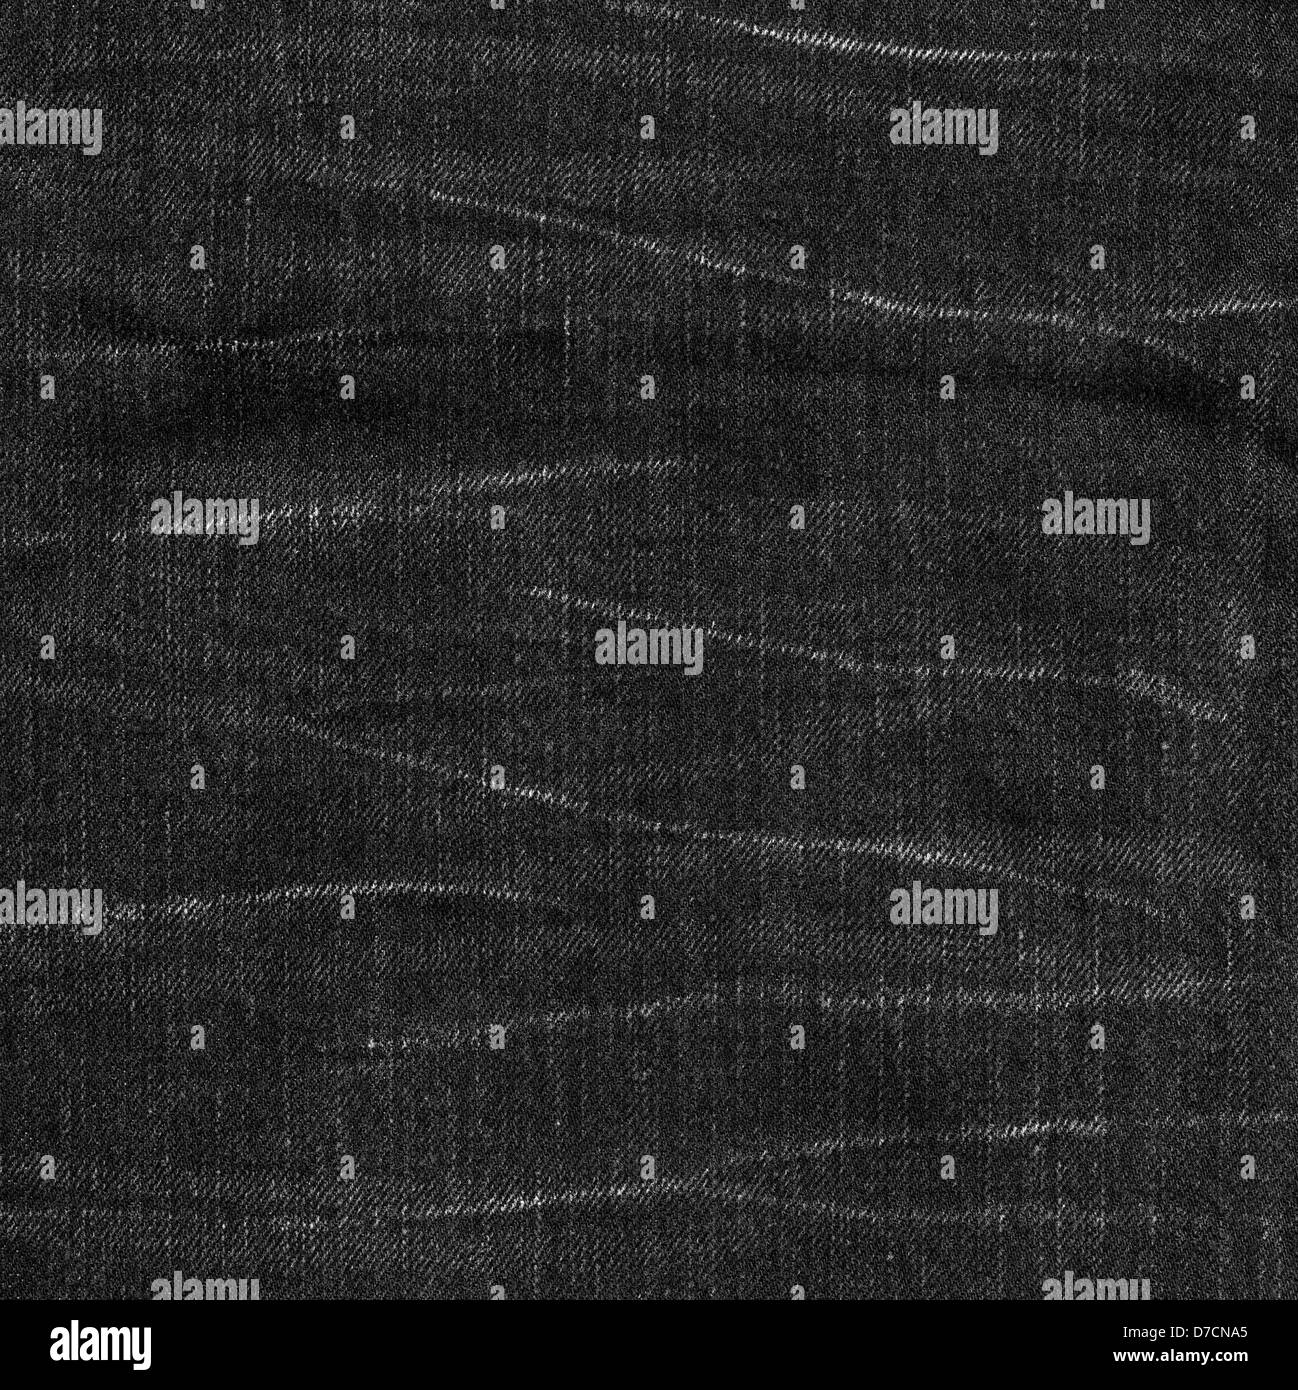 High resolution scan of black denim fabric. Scanned at 1200dpi using a professional Epson V700 scanner. Stock Photo